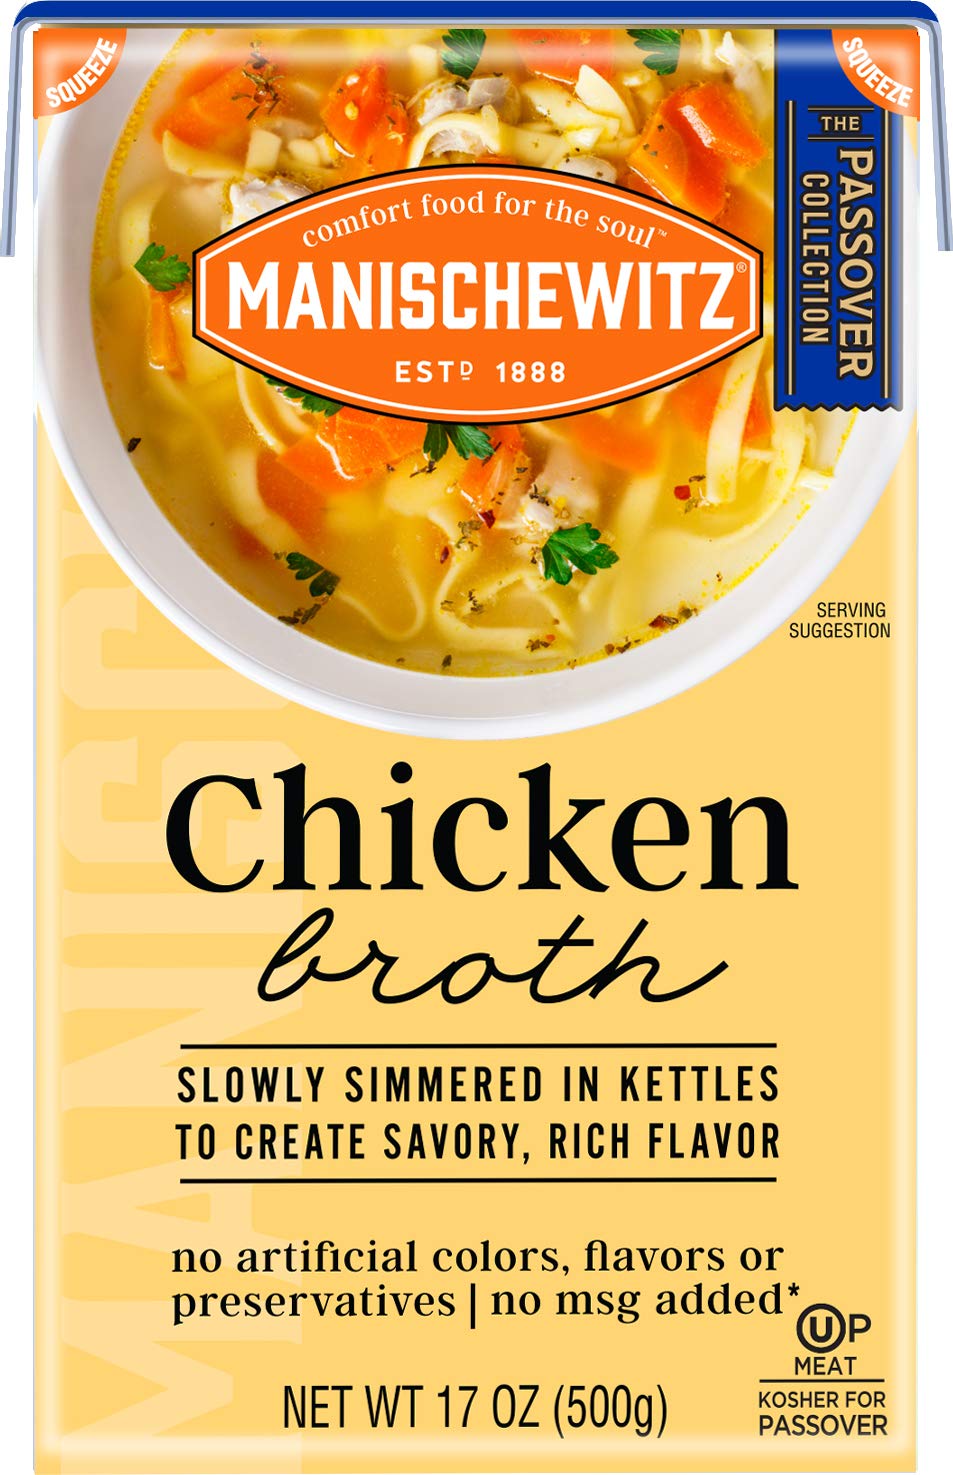 Manischewitz Chicken Broth 17oz, Flavorful, Kettle Cooked, Slowly Simmered, Kosher for Passover : Grocery & Gourmet Food